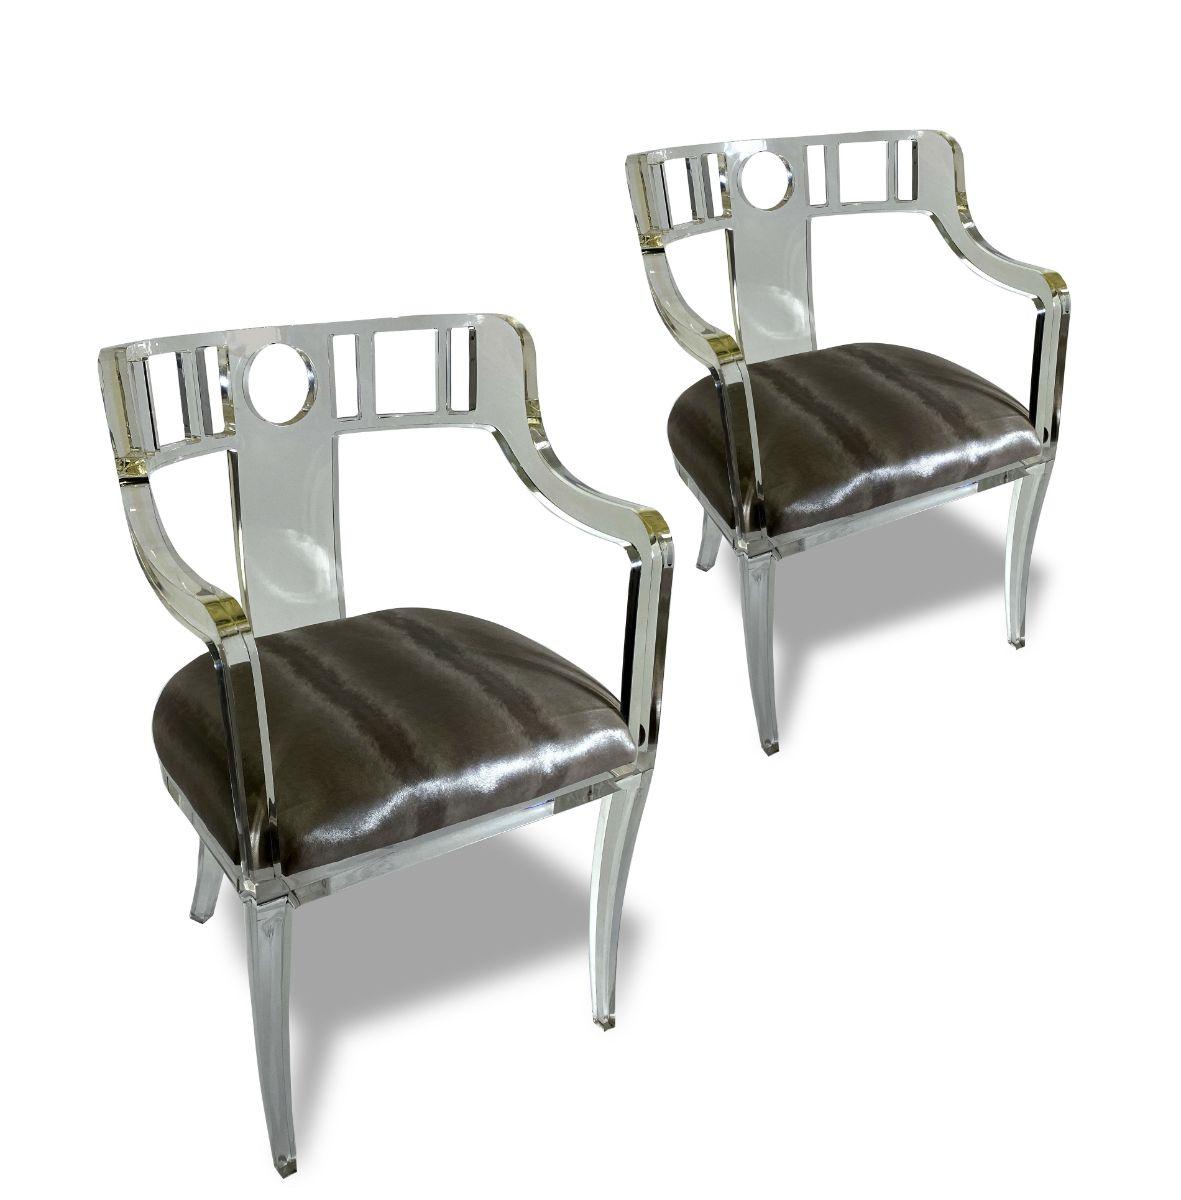 These chairs are unique. They were custom made from the side chairs that Bradfield designed, and the armchairs were made at the clients request as head chairs for a long set. They are quite stunningand quite comfortable. Quality is out of this world.